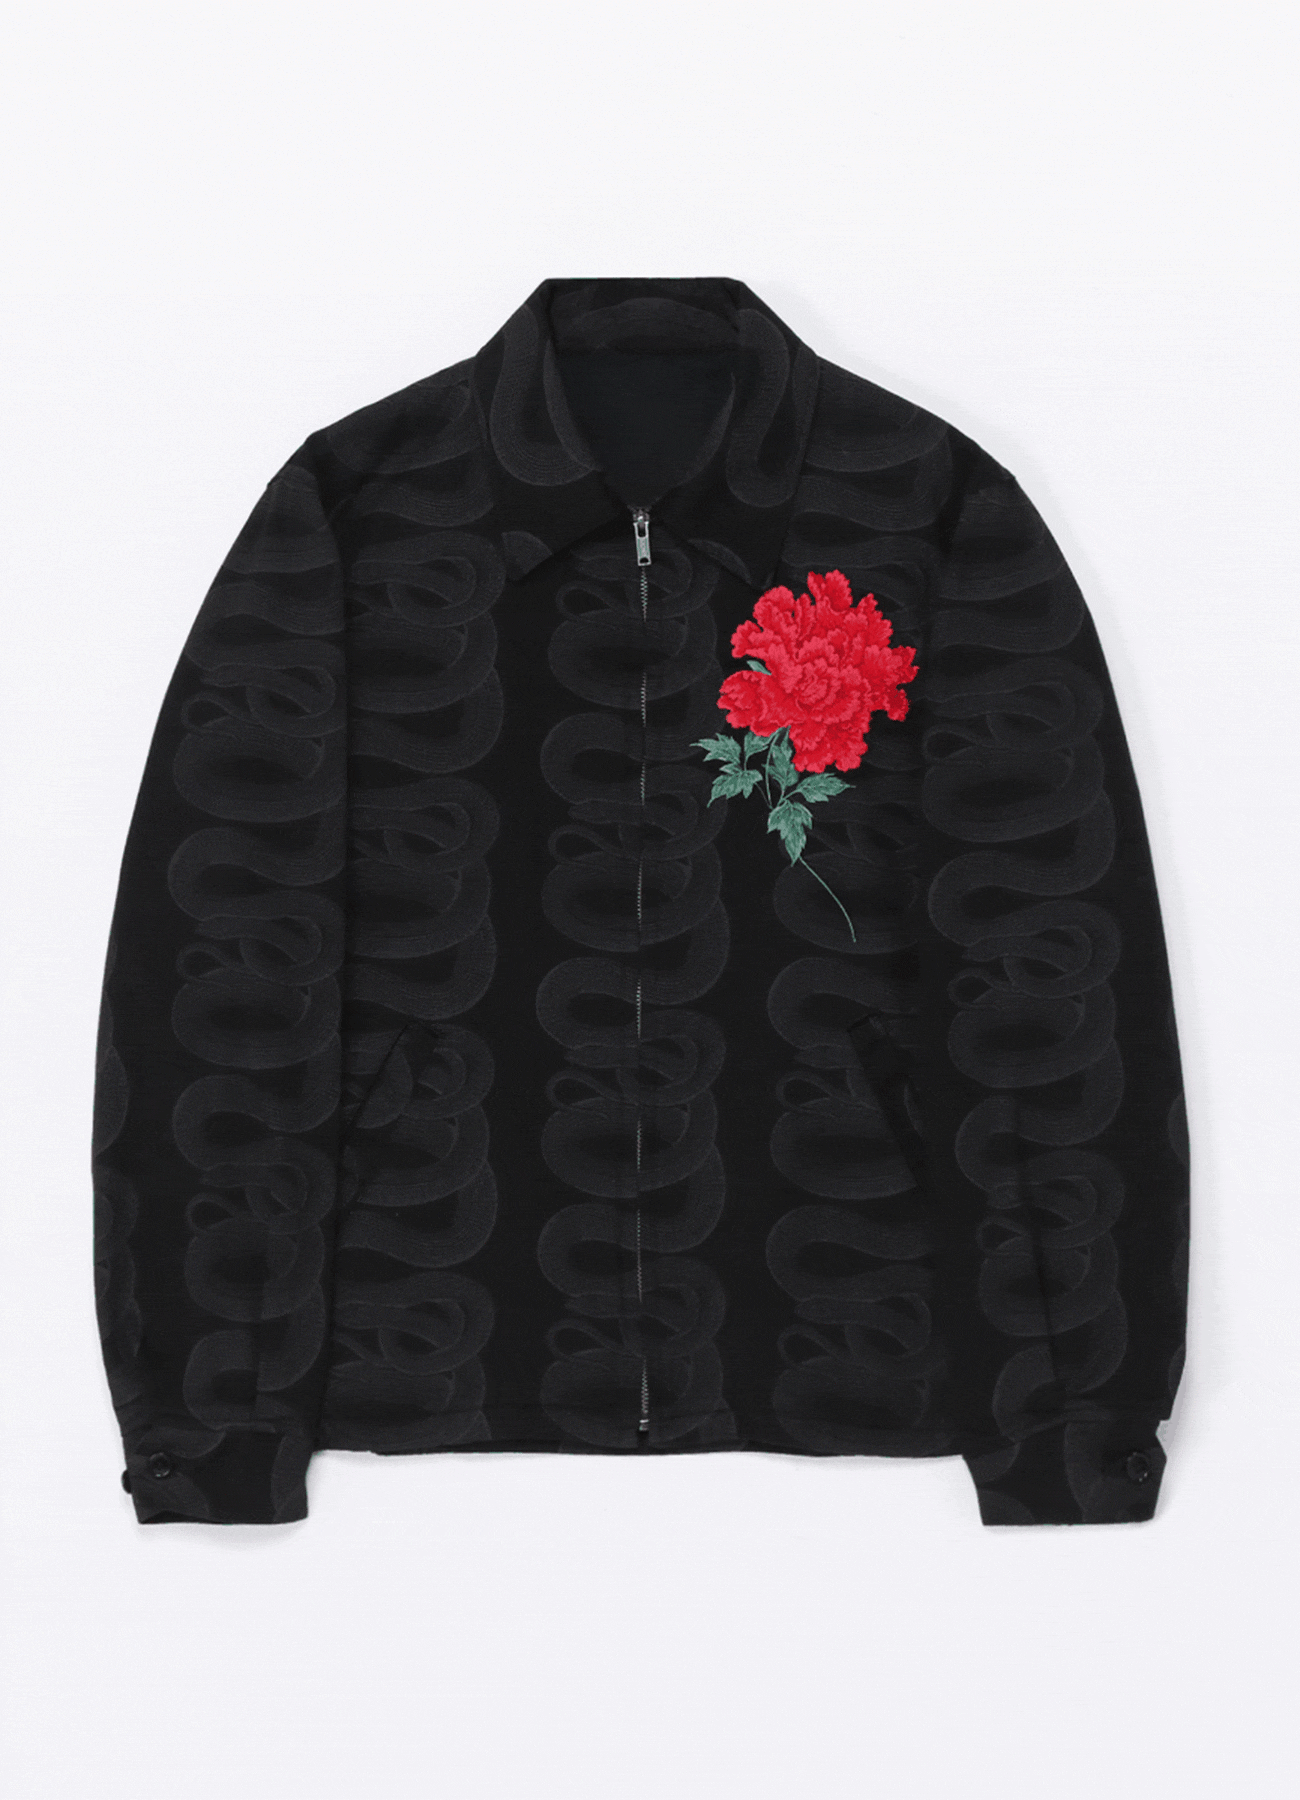 WILDSIDE × HYSTERIC GLAMOUR SNAKE MOTIF EMBROIDERED JACKET